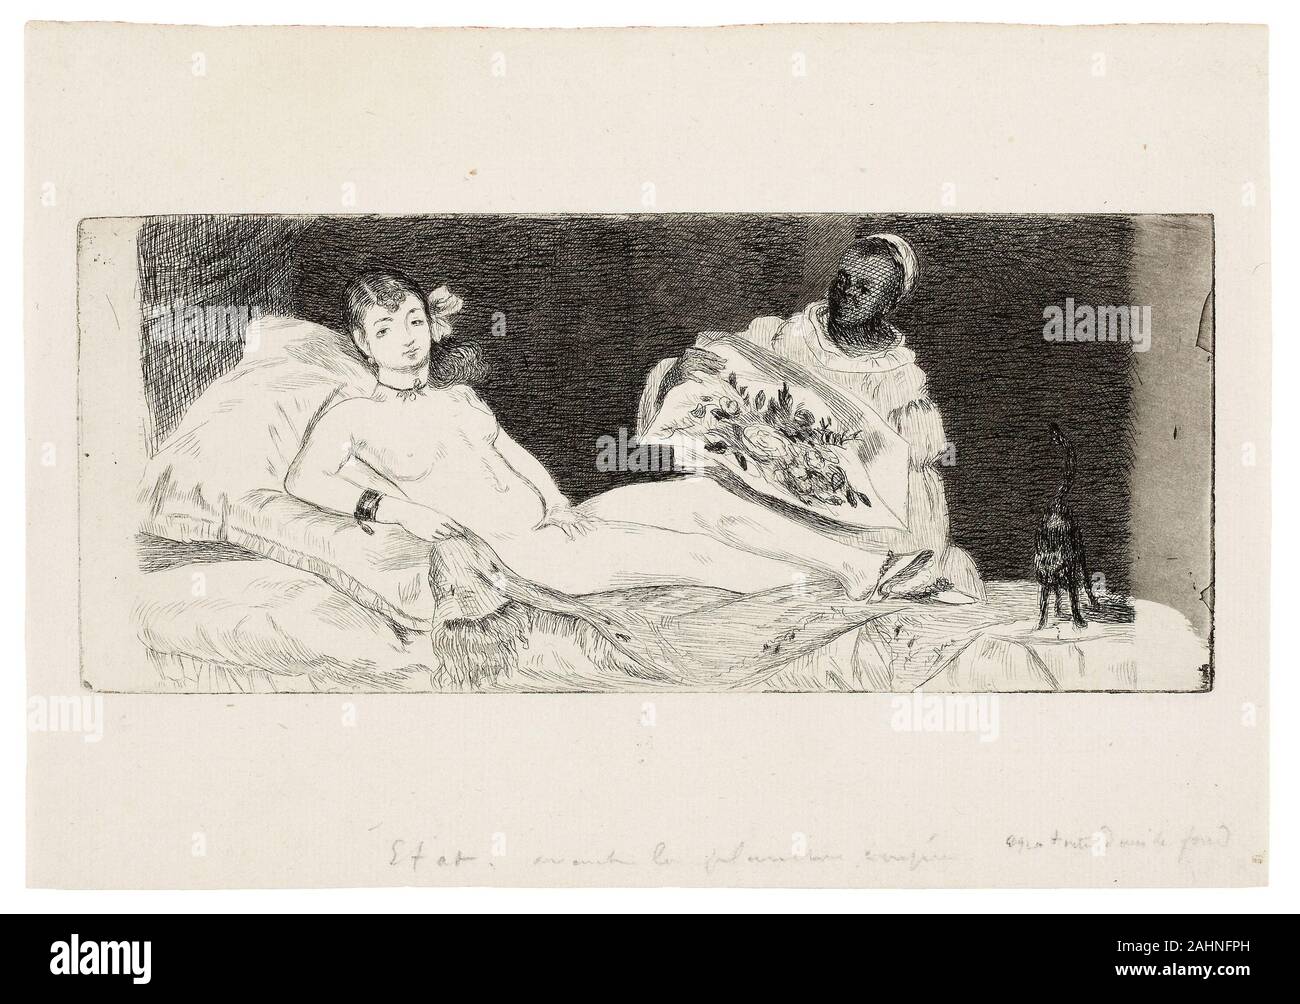 Édouard Manet. Olympia (published plate). 1867. France. Etching and aquatint in black on cream laid paper Paris was the undisputed artistic and cultural capital of Europe in the late 19th century; it was also home to a thriving population of prostitutes. As Hollis Clayson observed in her study of prostitution and French art, Painted Love, artists of the period, particularly the Impressionists, enthusiastically embraced the activities of these women through varying degrees of realistic imagery. The increasingly abstract depictions of prostitutes’ everyday pursuits, from bathing to entertaining Stock Photo